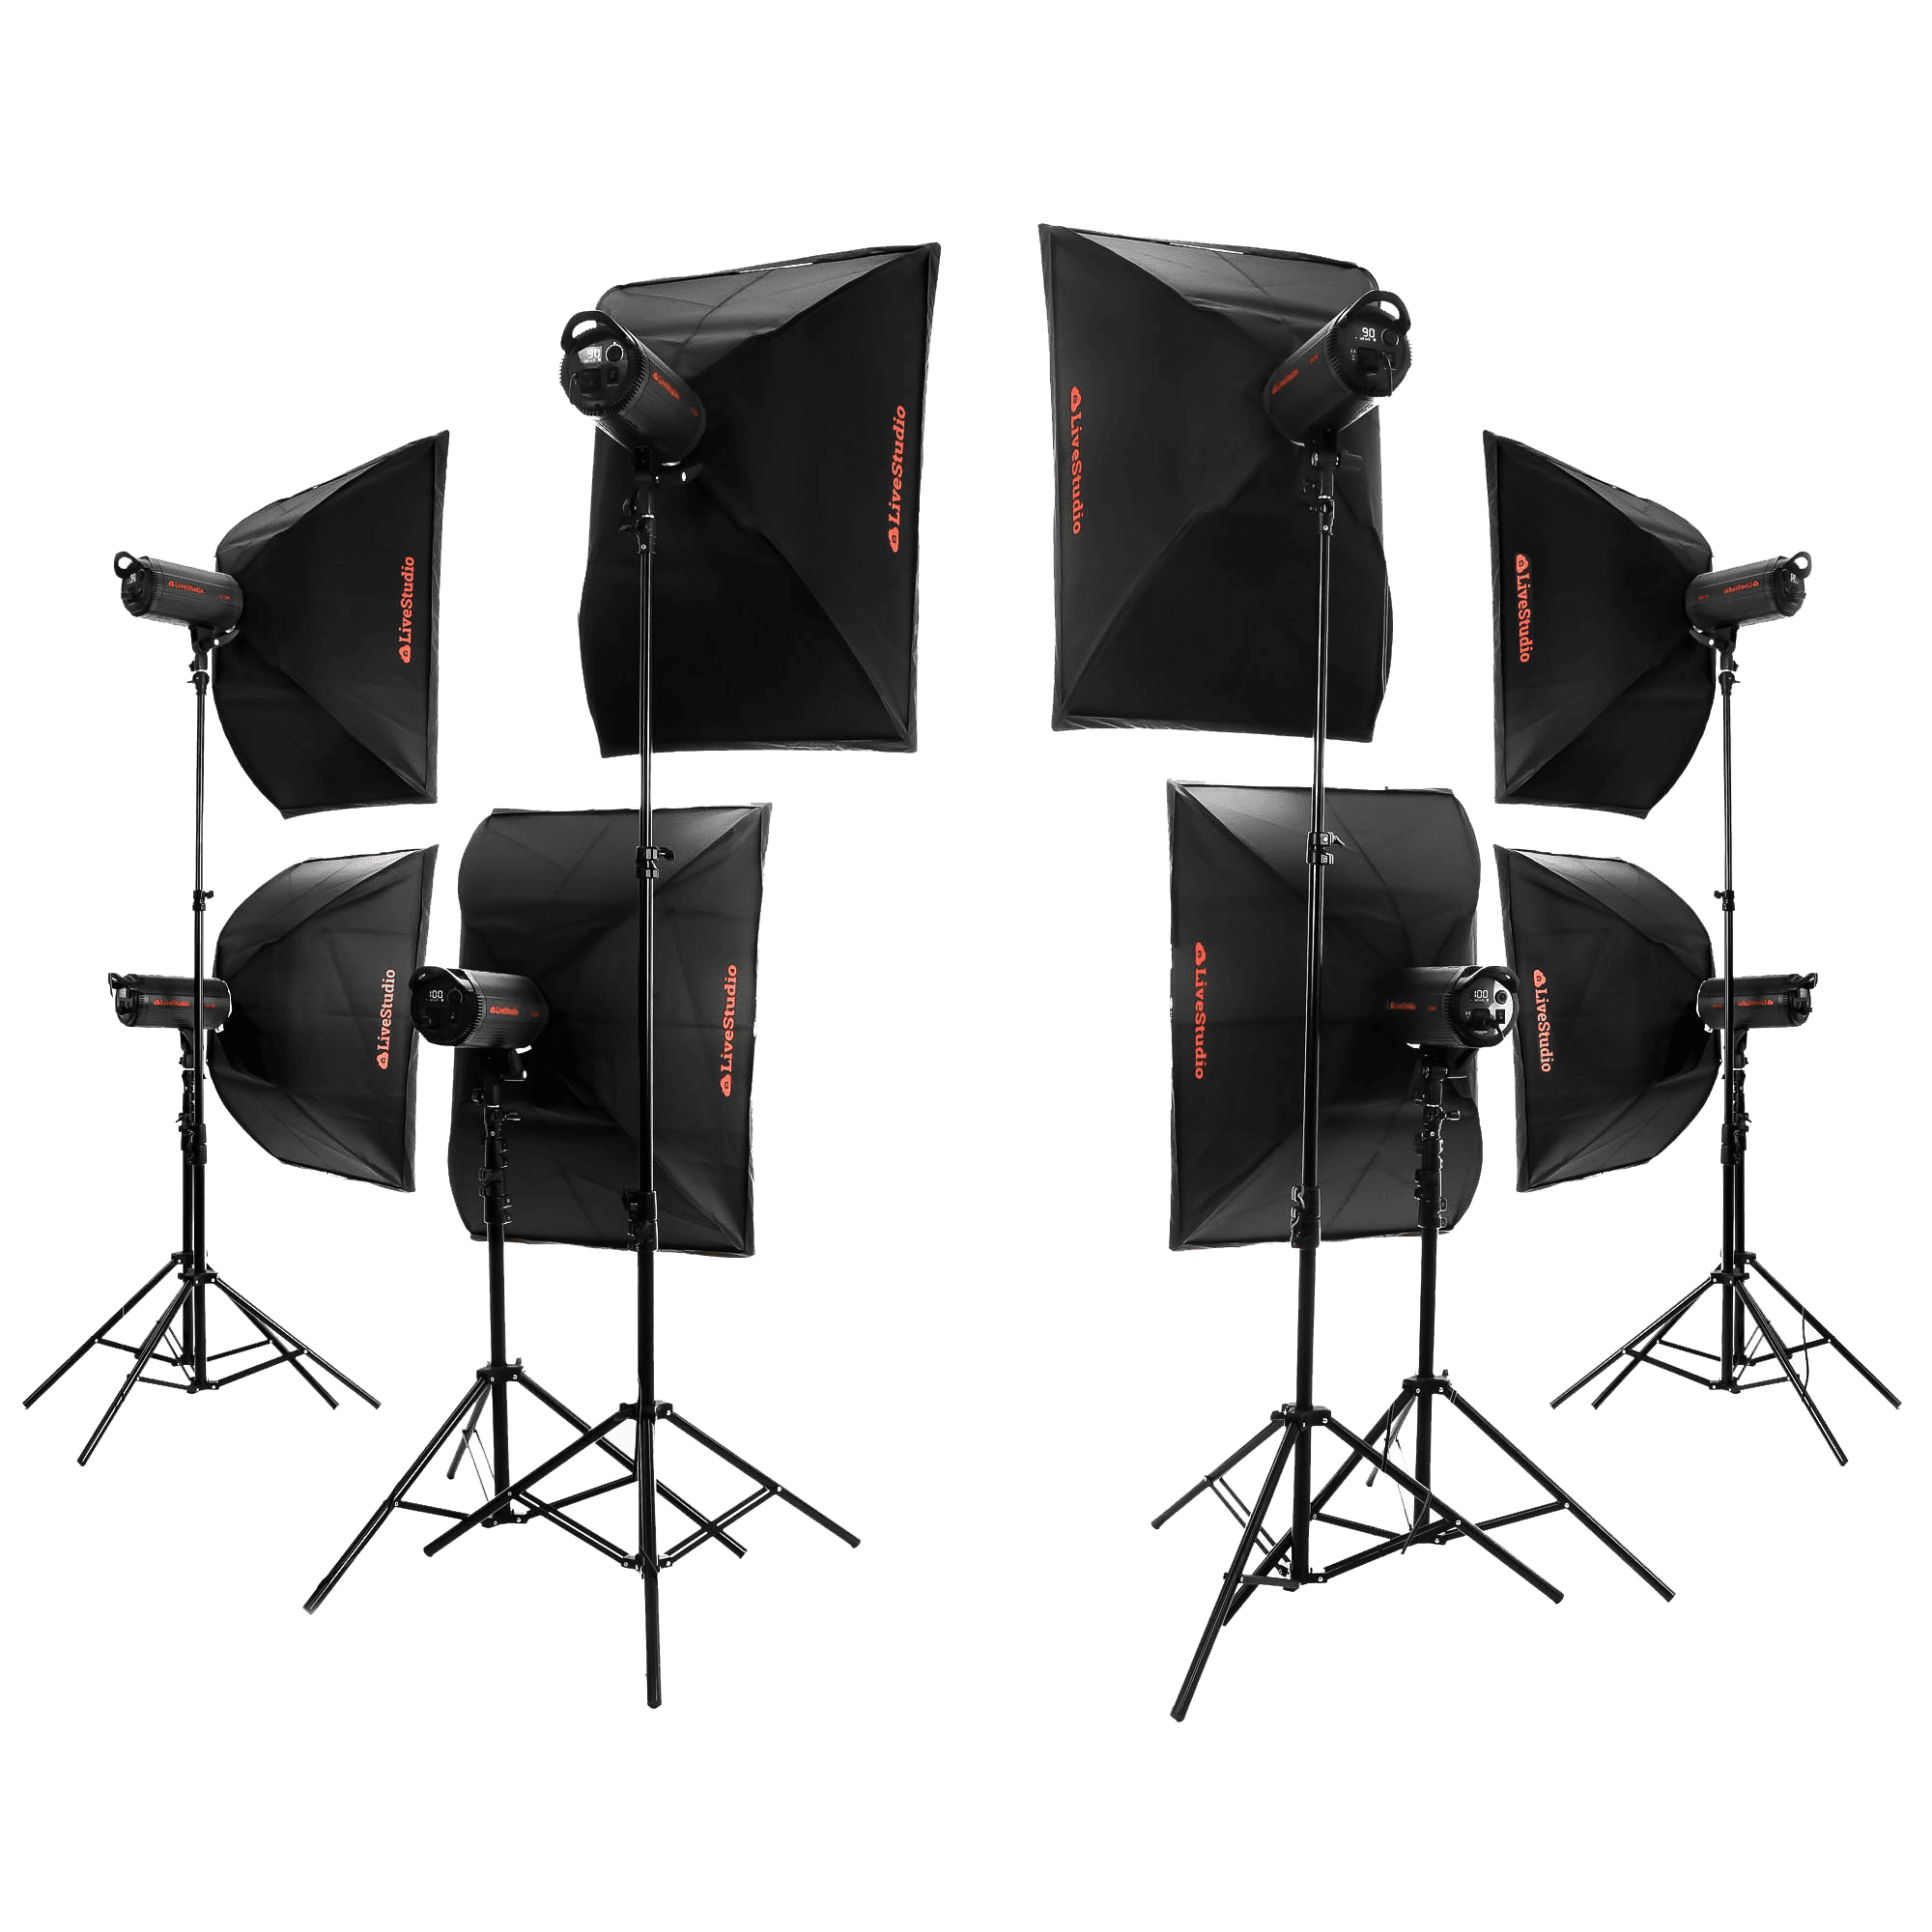 Ortery LiveStudio - 8light product photography kit and software